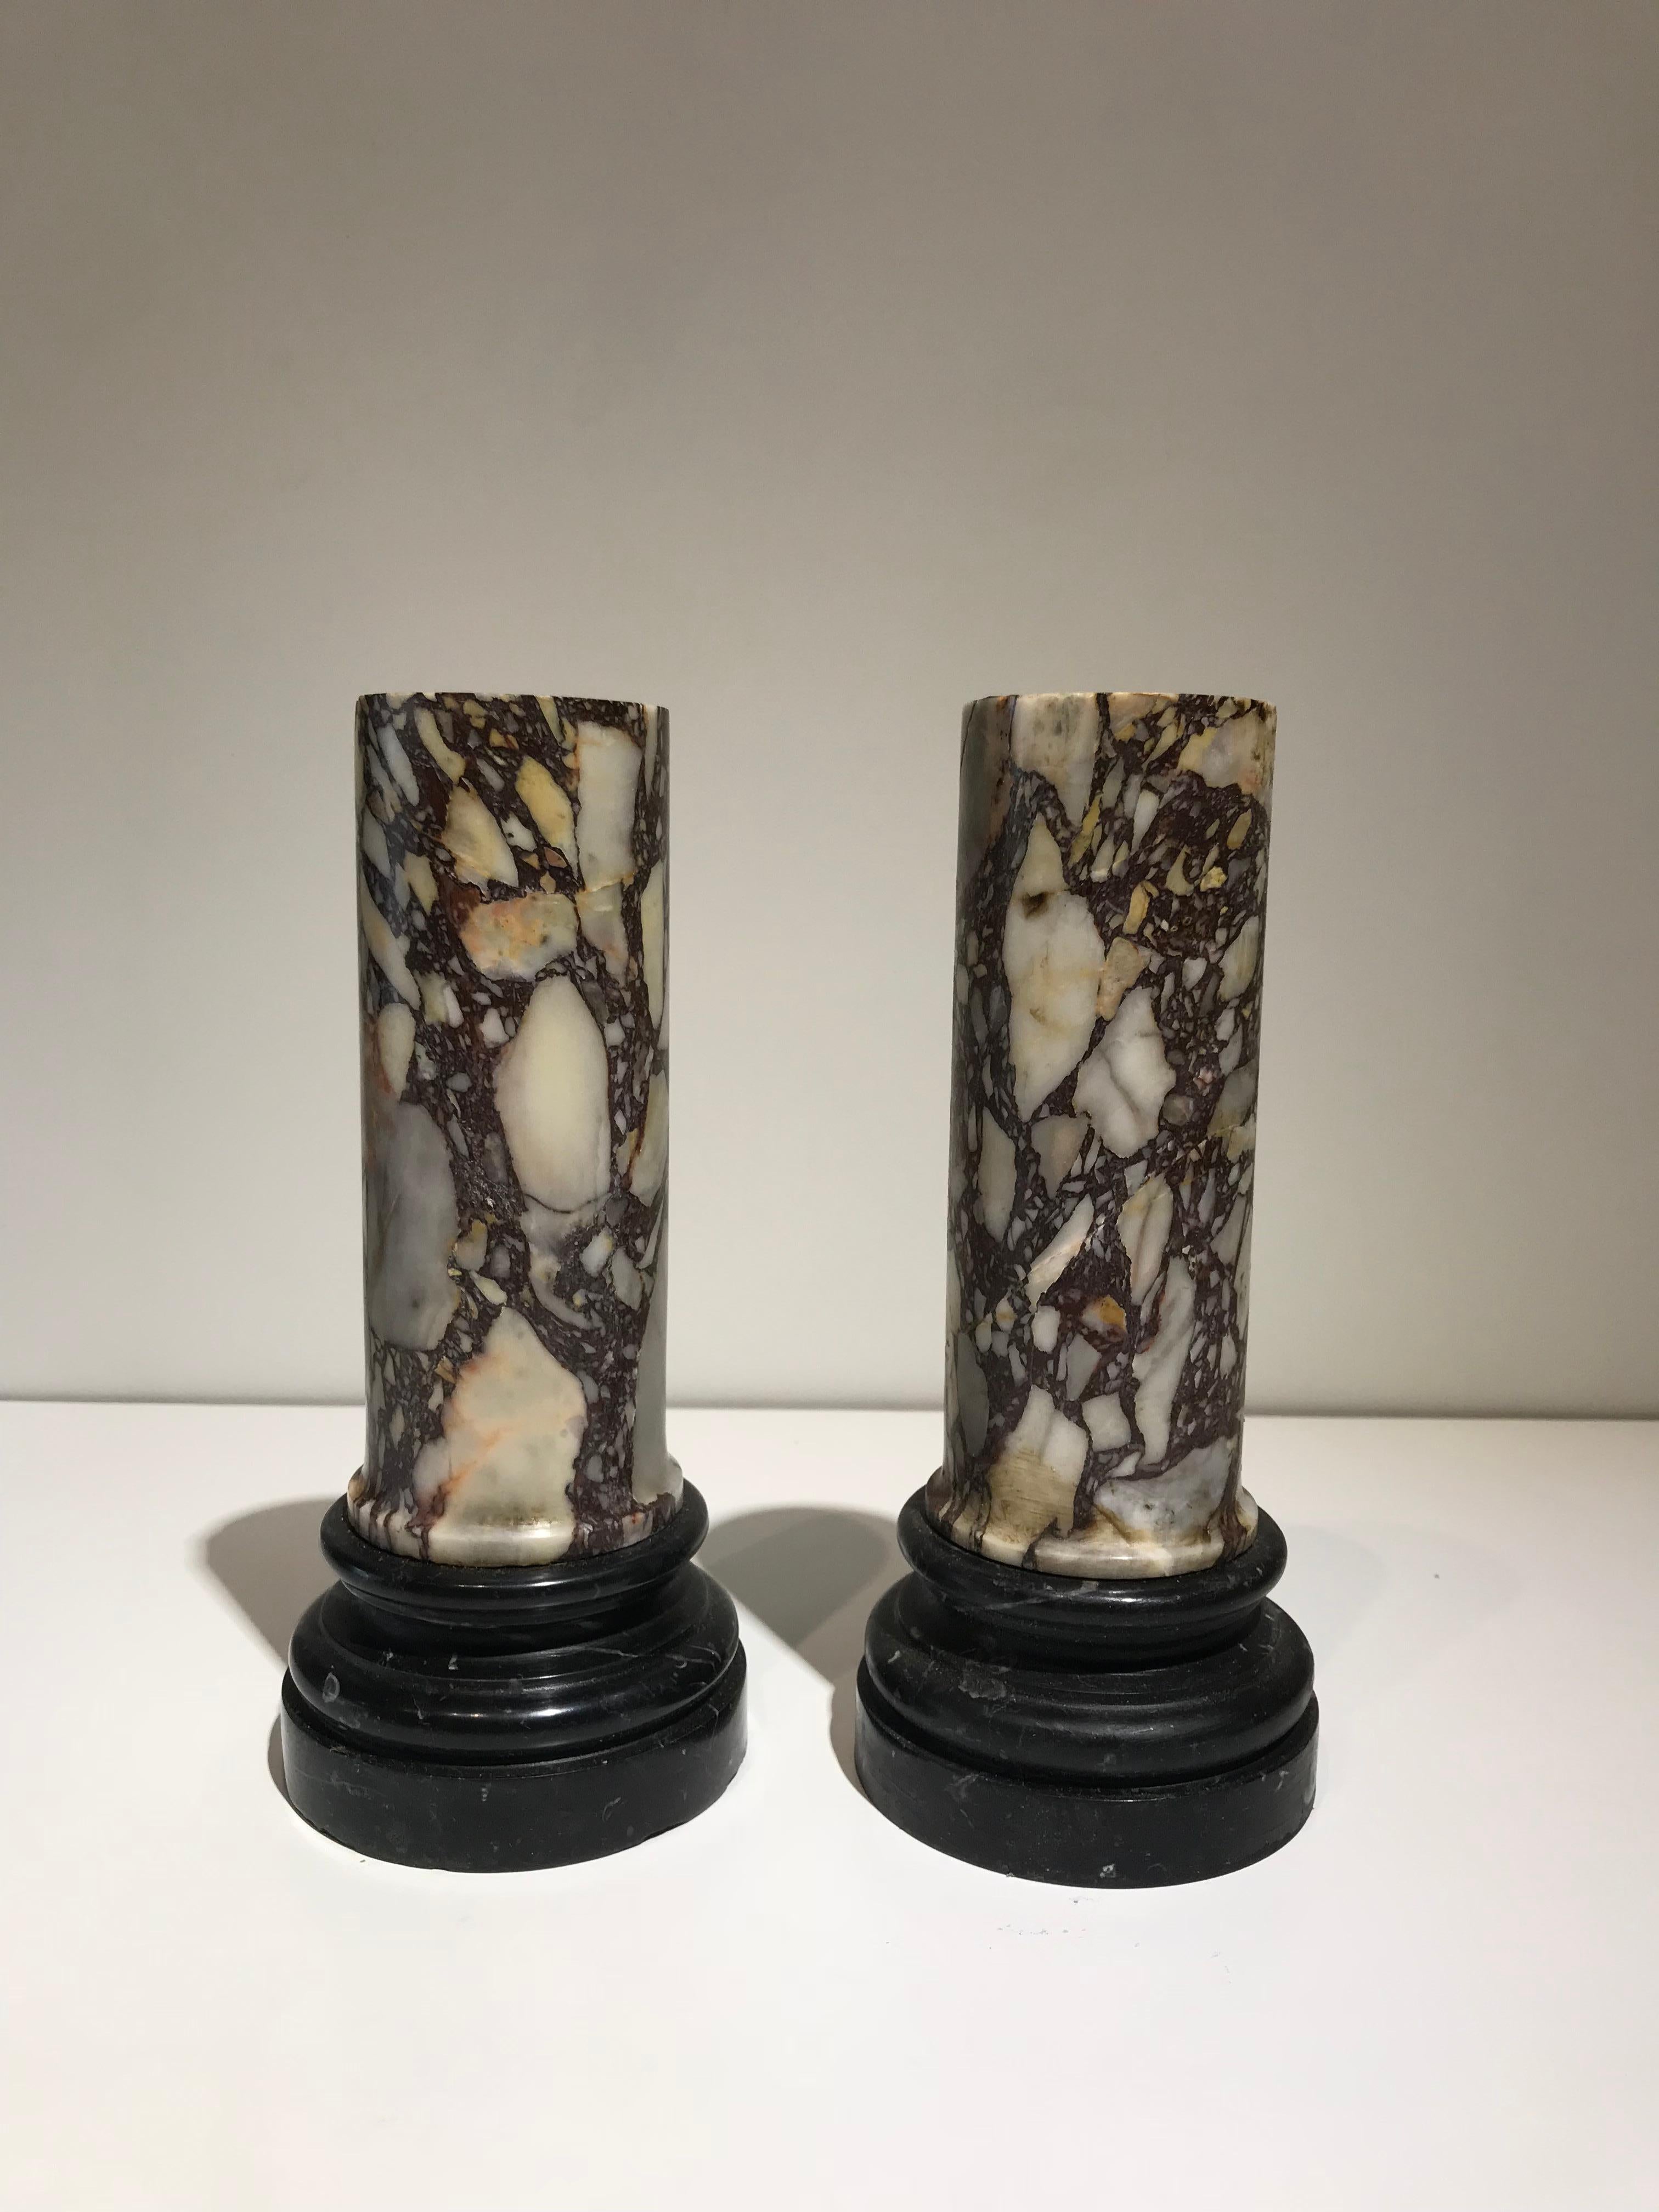 A very beautiful pair of Grand Tour pedestal in Classical Roman style made in a rare and very elegance specimen marble, Breccia di Sciro. The term 